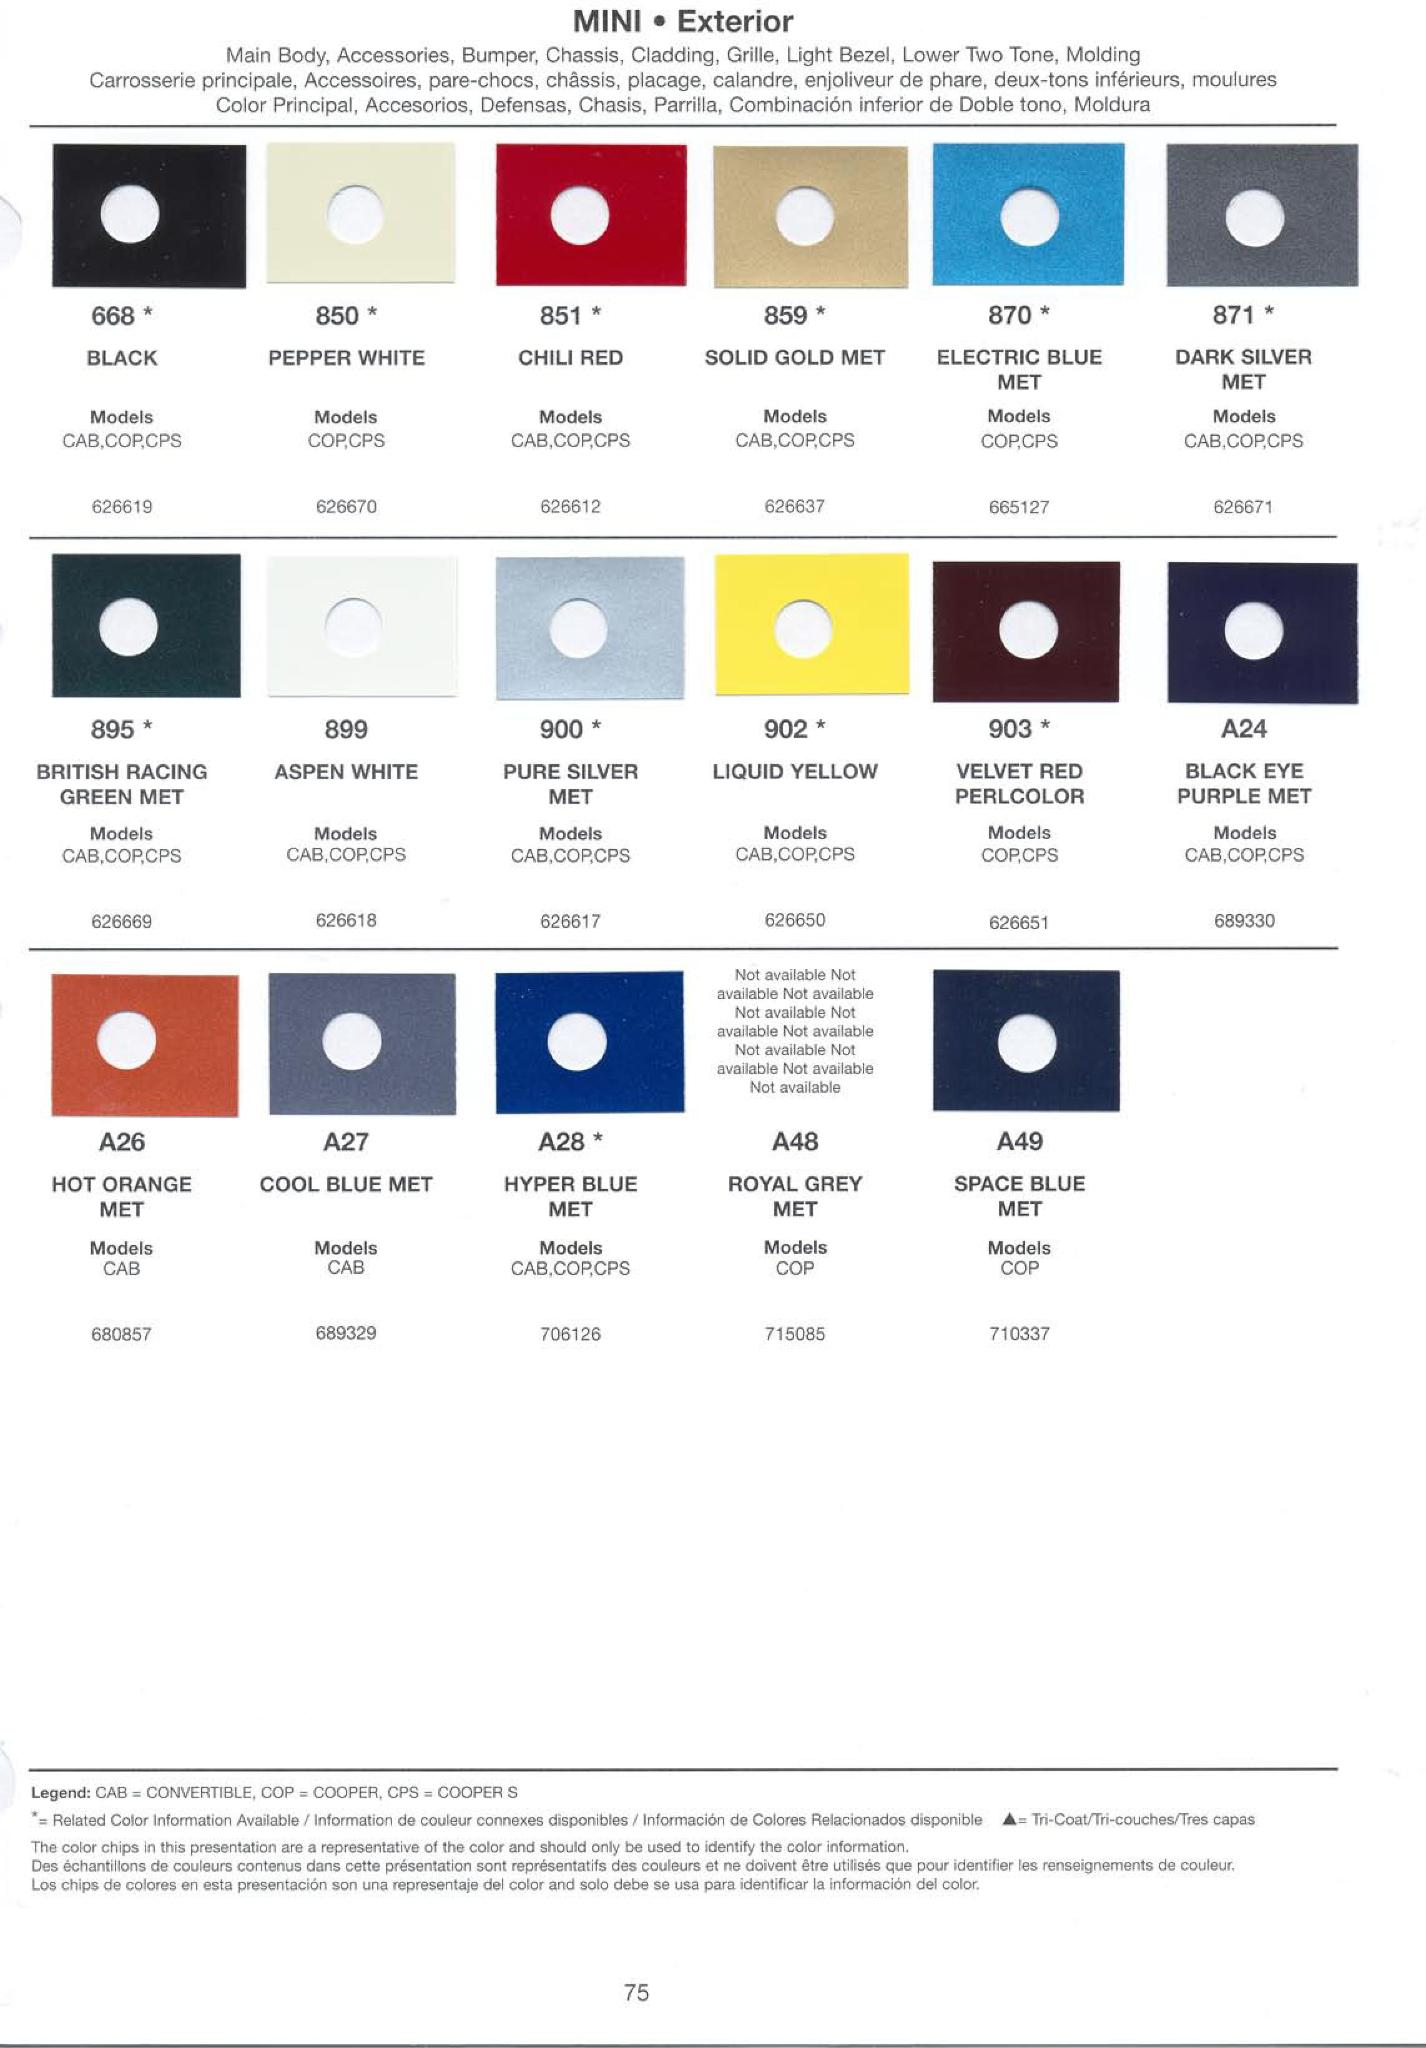 Paint Color examples with their exterior color code